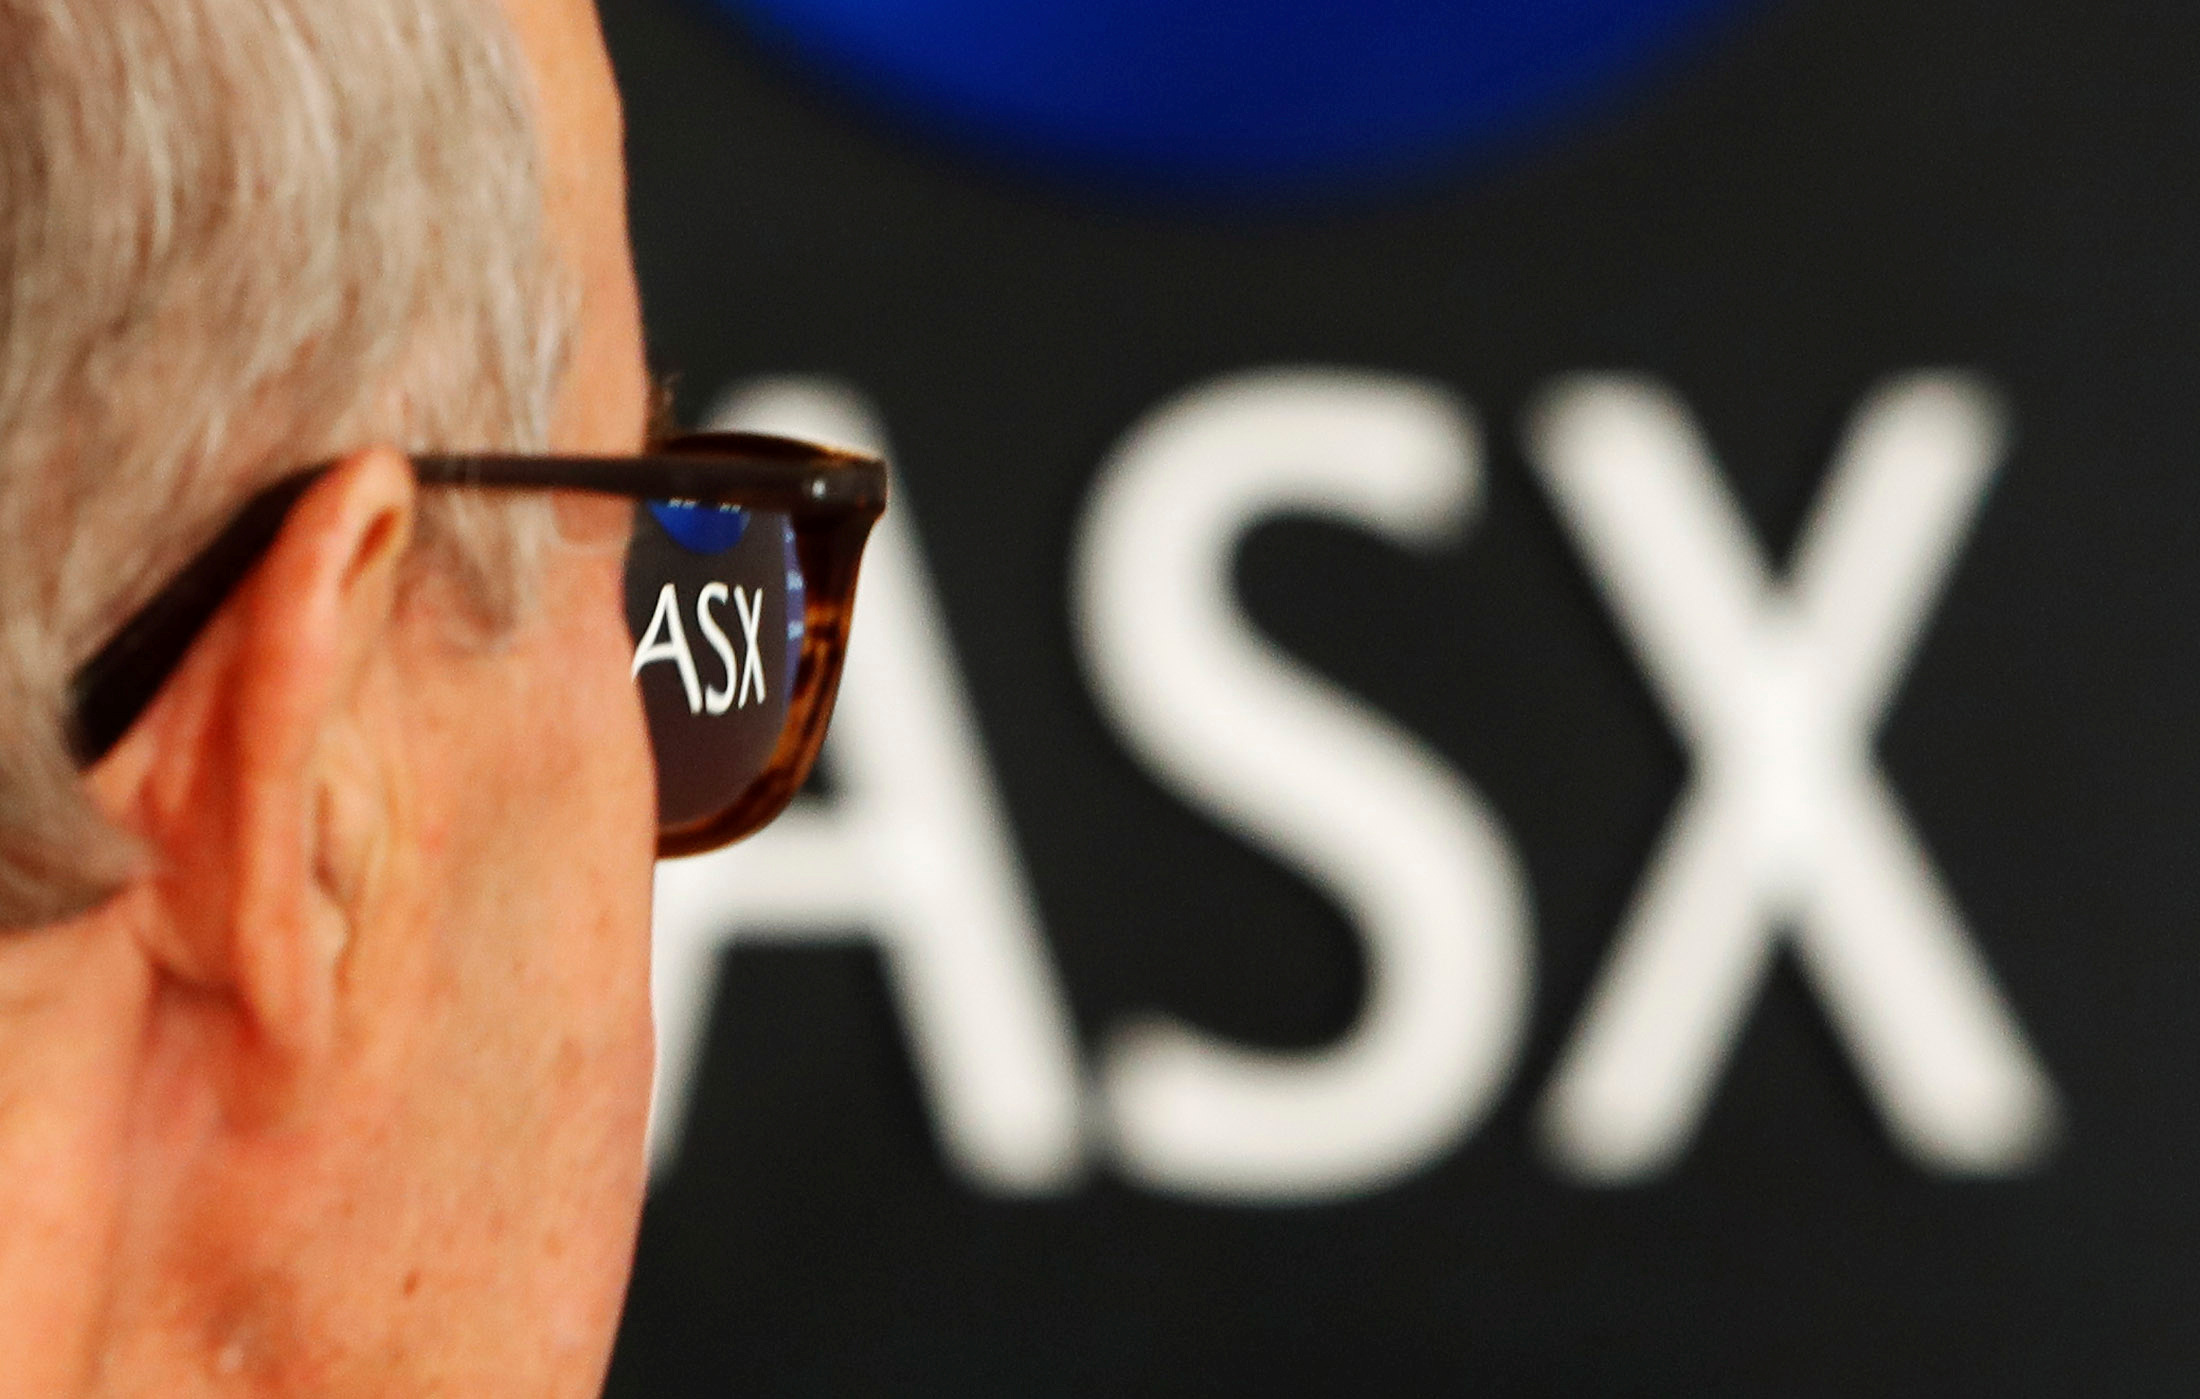 A man looks at the main board at the Australian Securities Exchange building in central Sydney